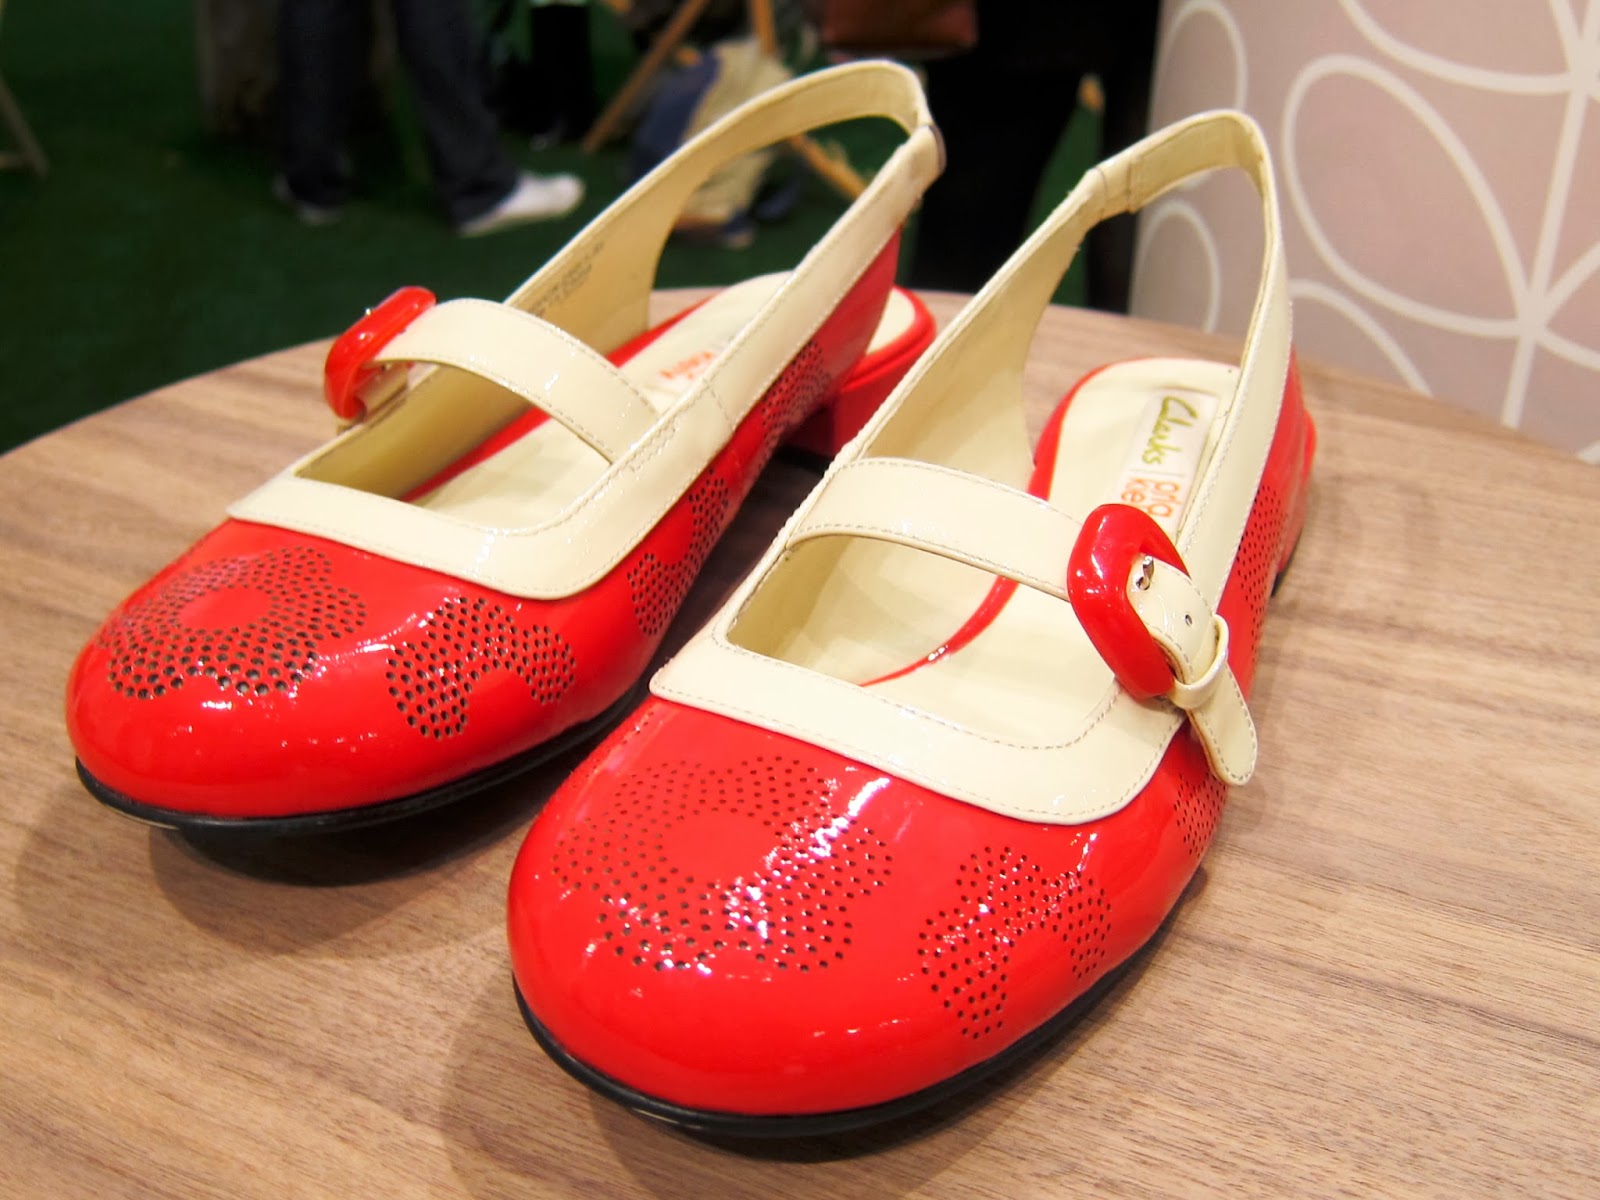 Clarks S/S14 Collection (& Orla Kiely Collaboration ) - that's so yesterday